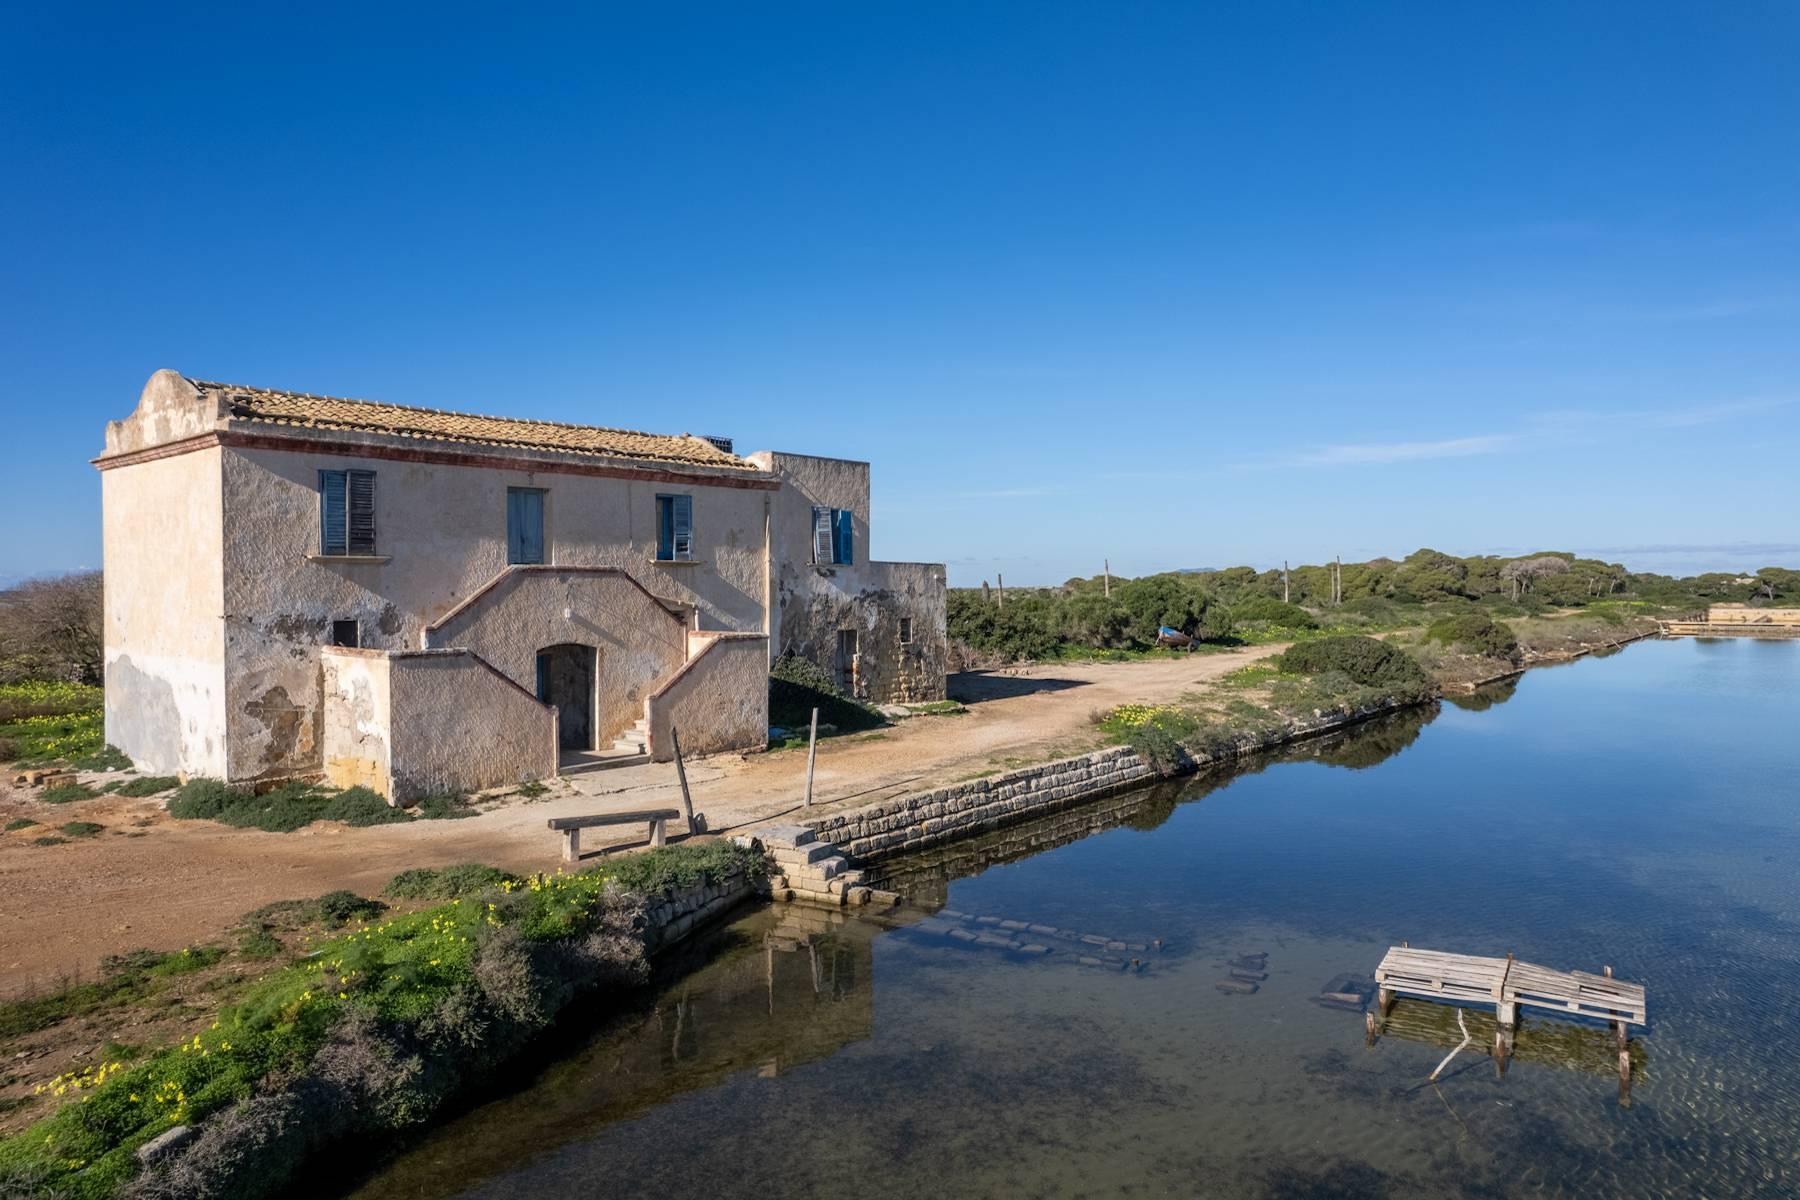 Pied dan s l'eau historic residence on Isola Lunga with private landing stage - 5